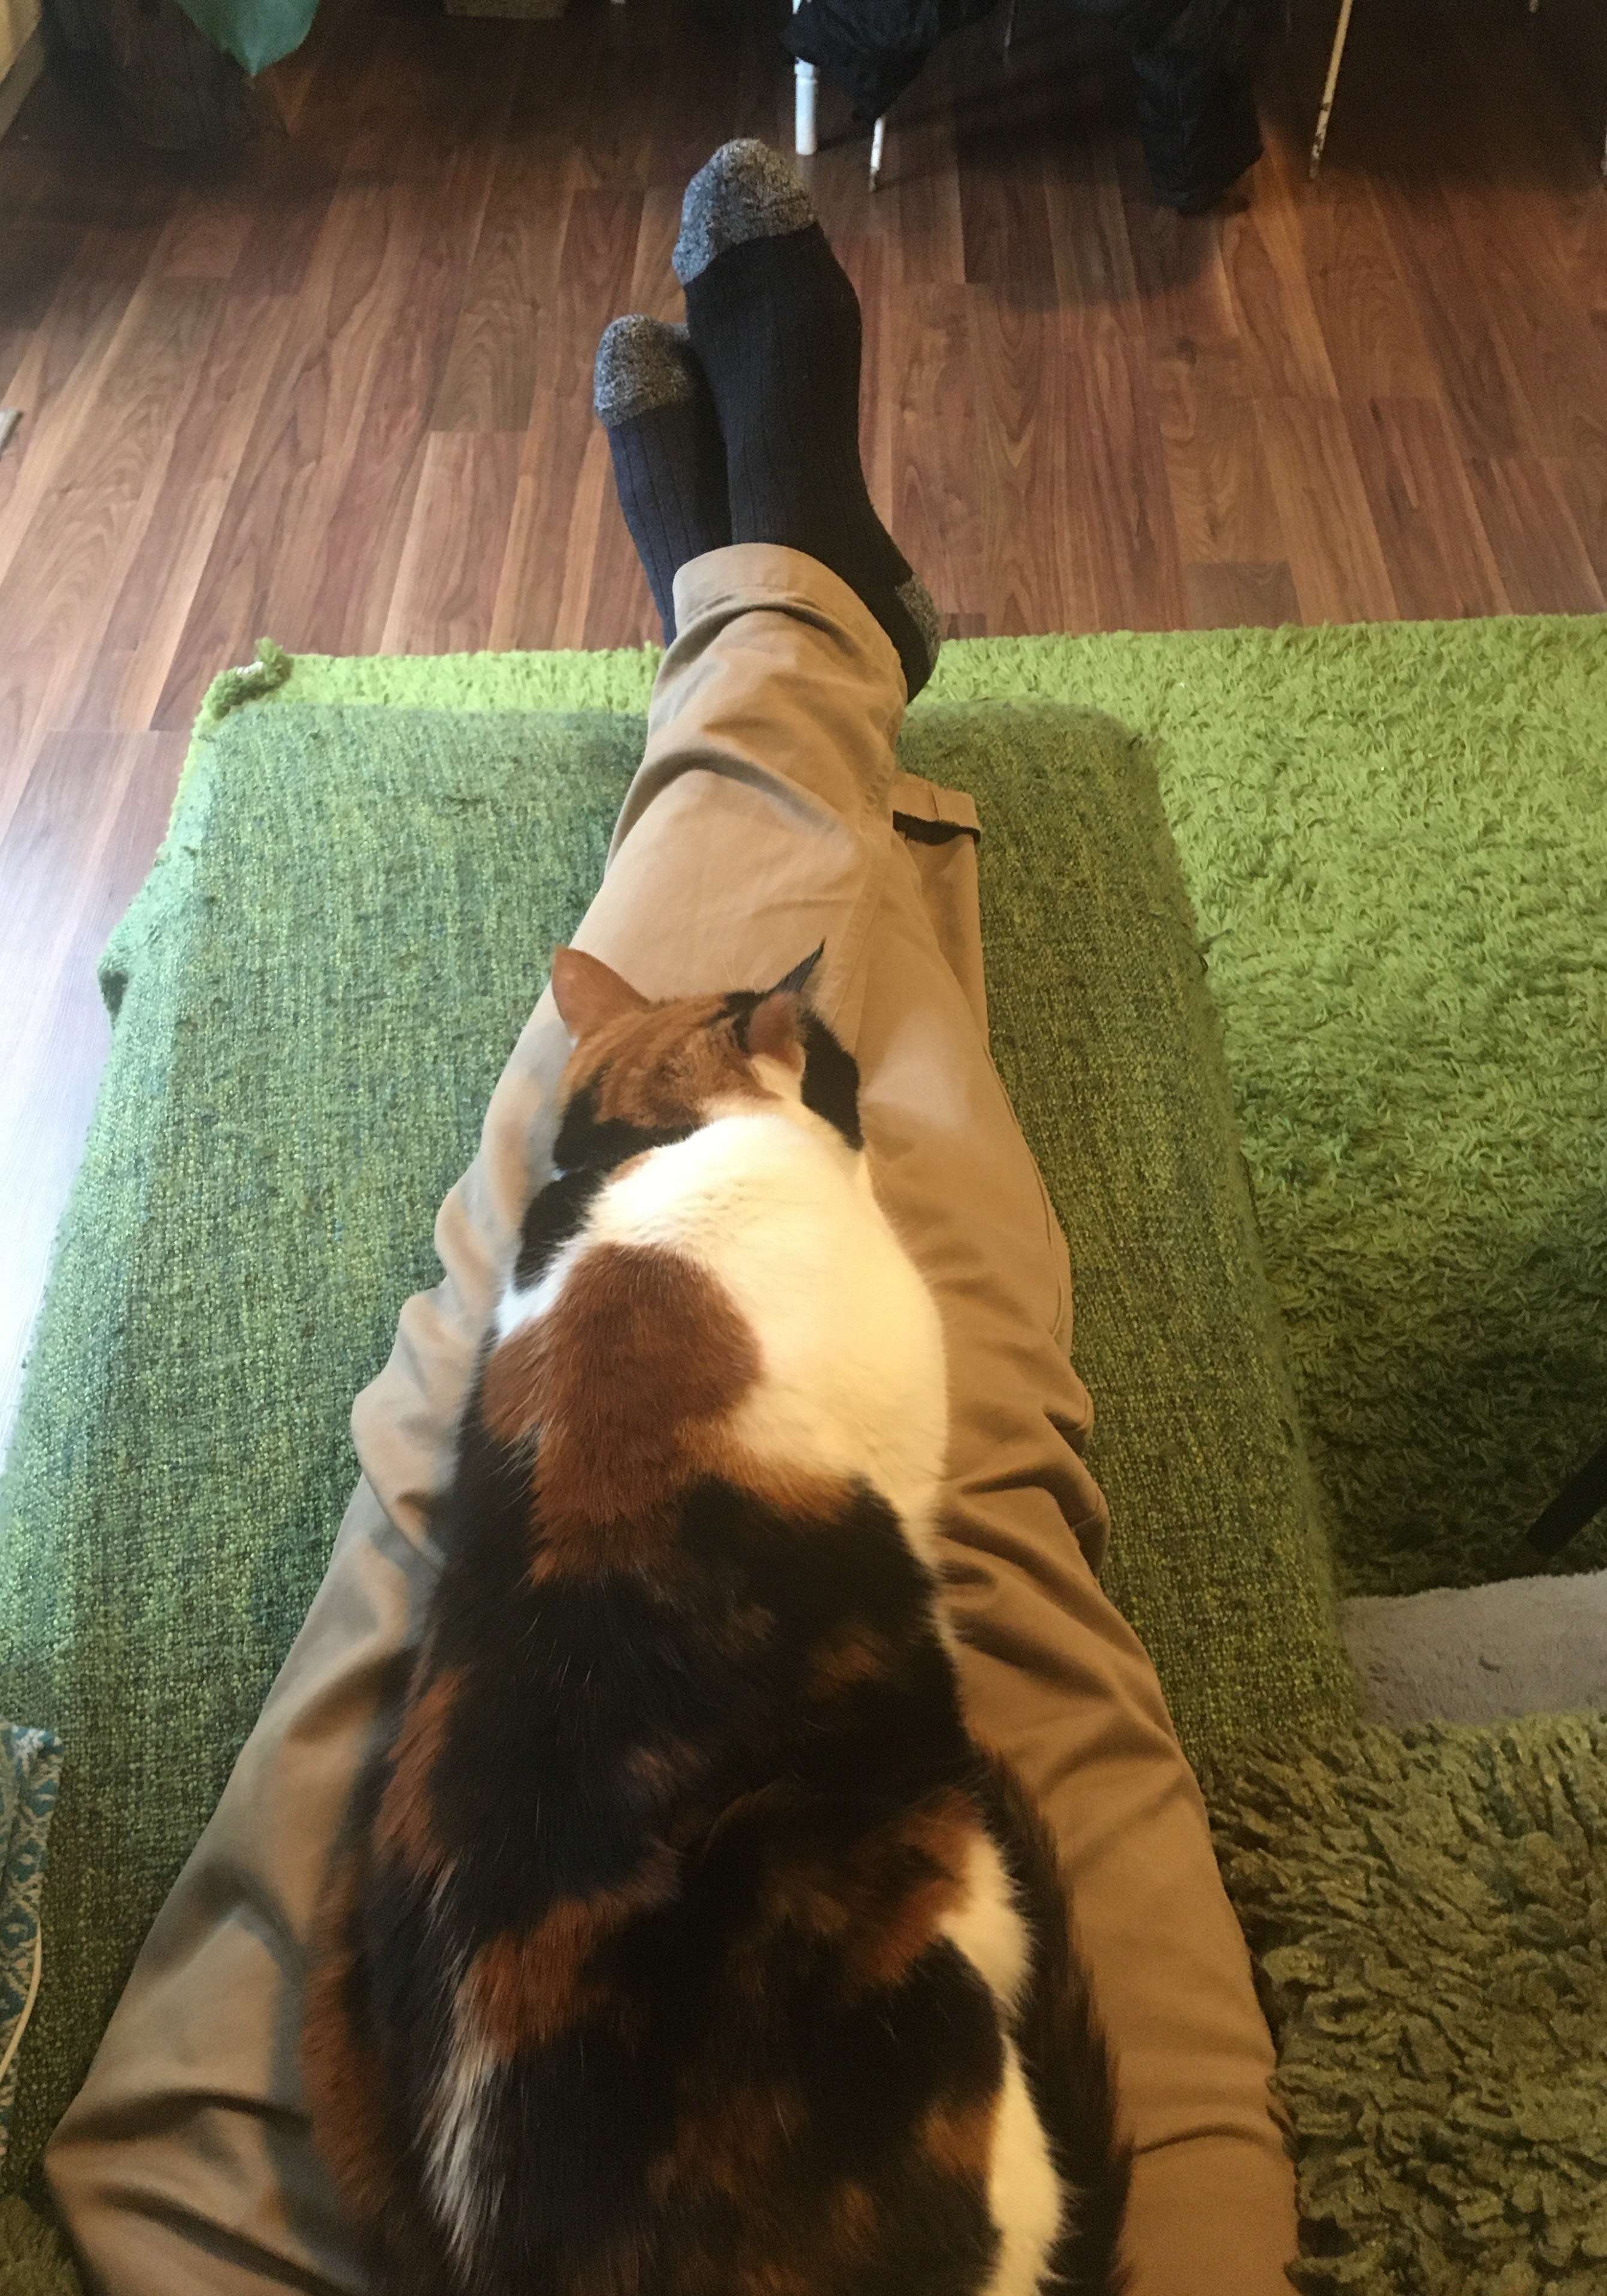 A clingy cat named Ziggy sits on her dad's lap